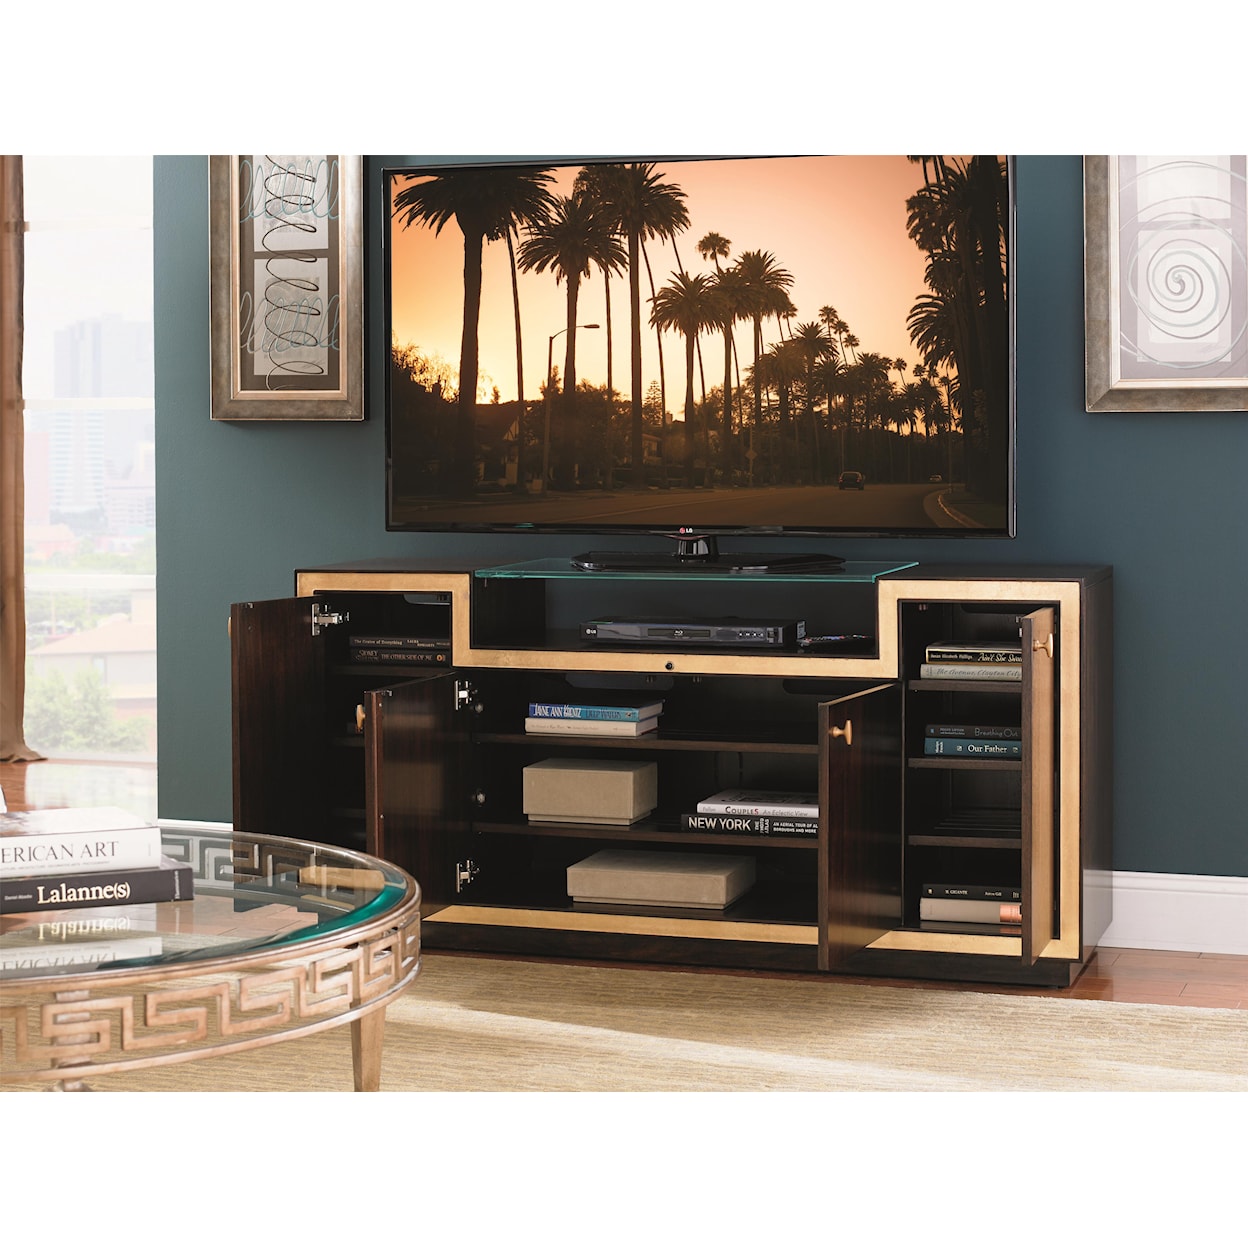 Sligh Bel Aire Palisades Media Console 